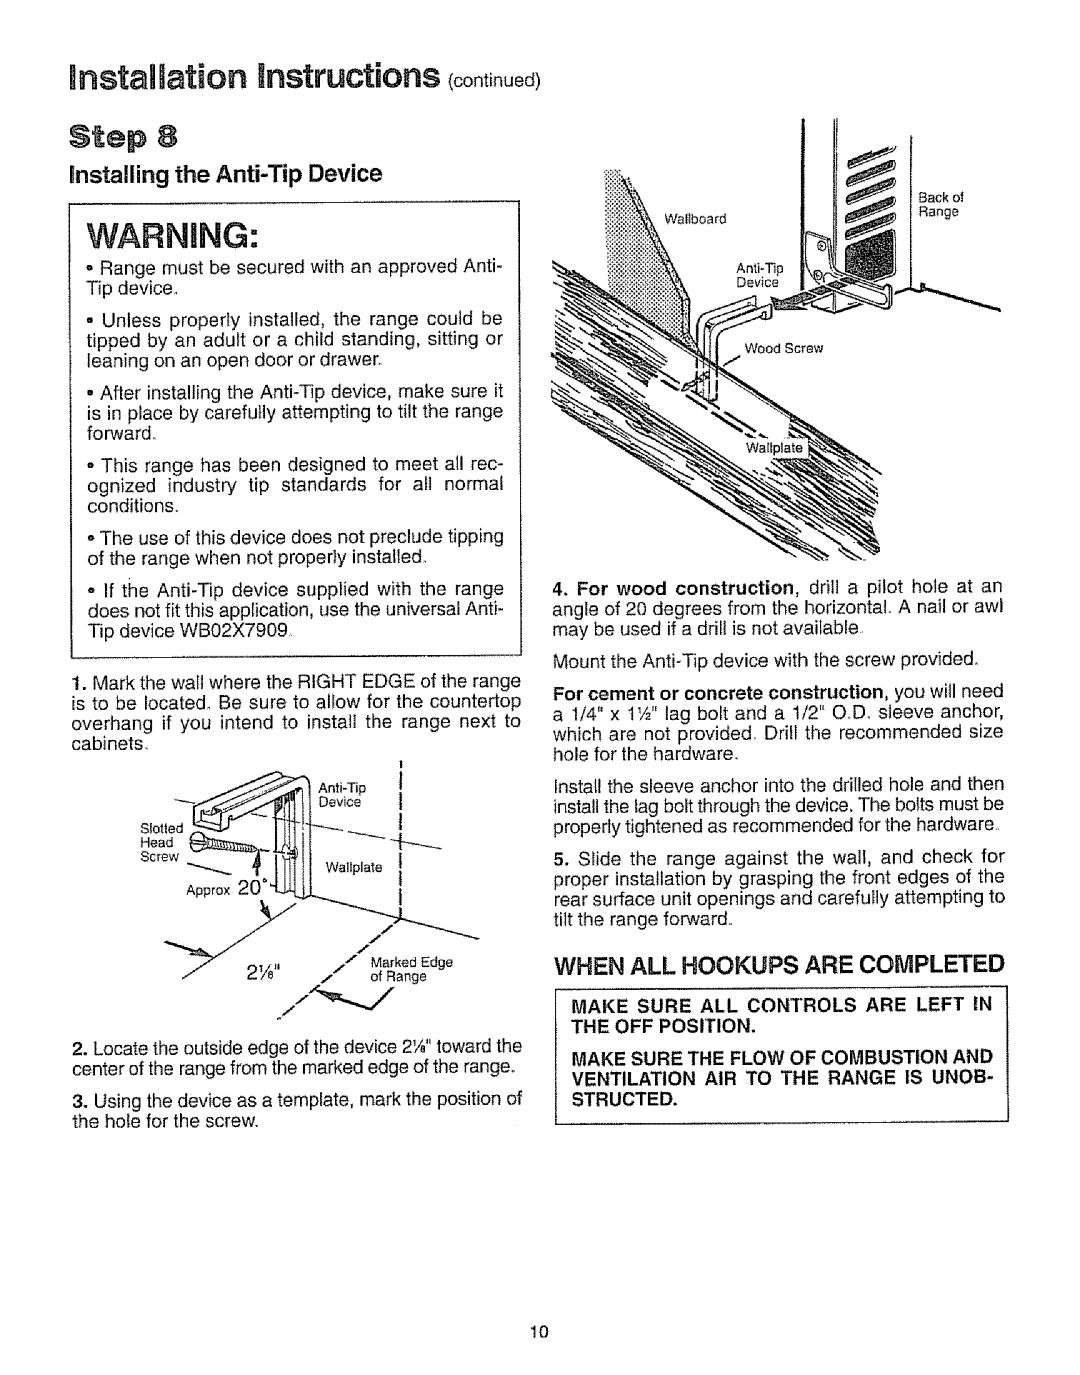 Sears 73311, 73328, 73321 mnstaHUationinstructions continued, Step, Ao i- p, I tJ,11, installing the Anti-Tip Device, Head 